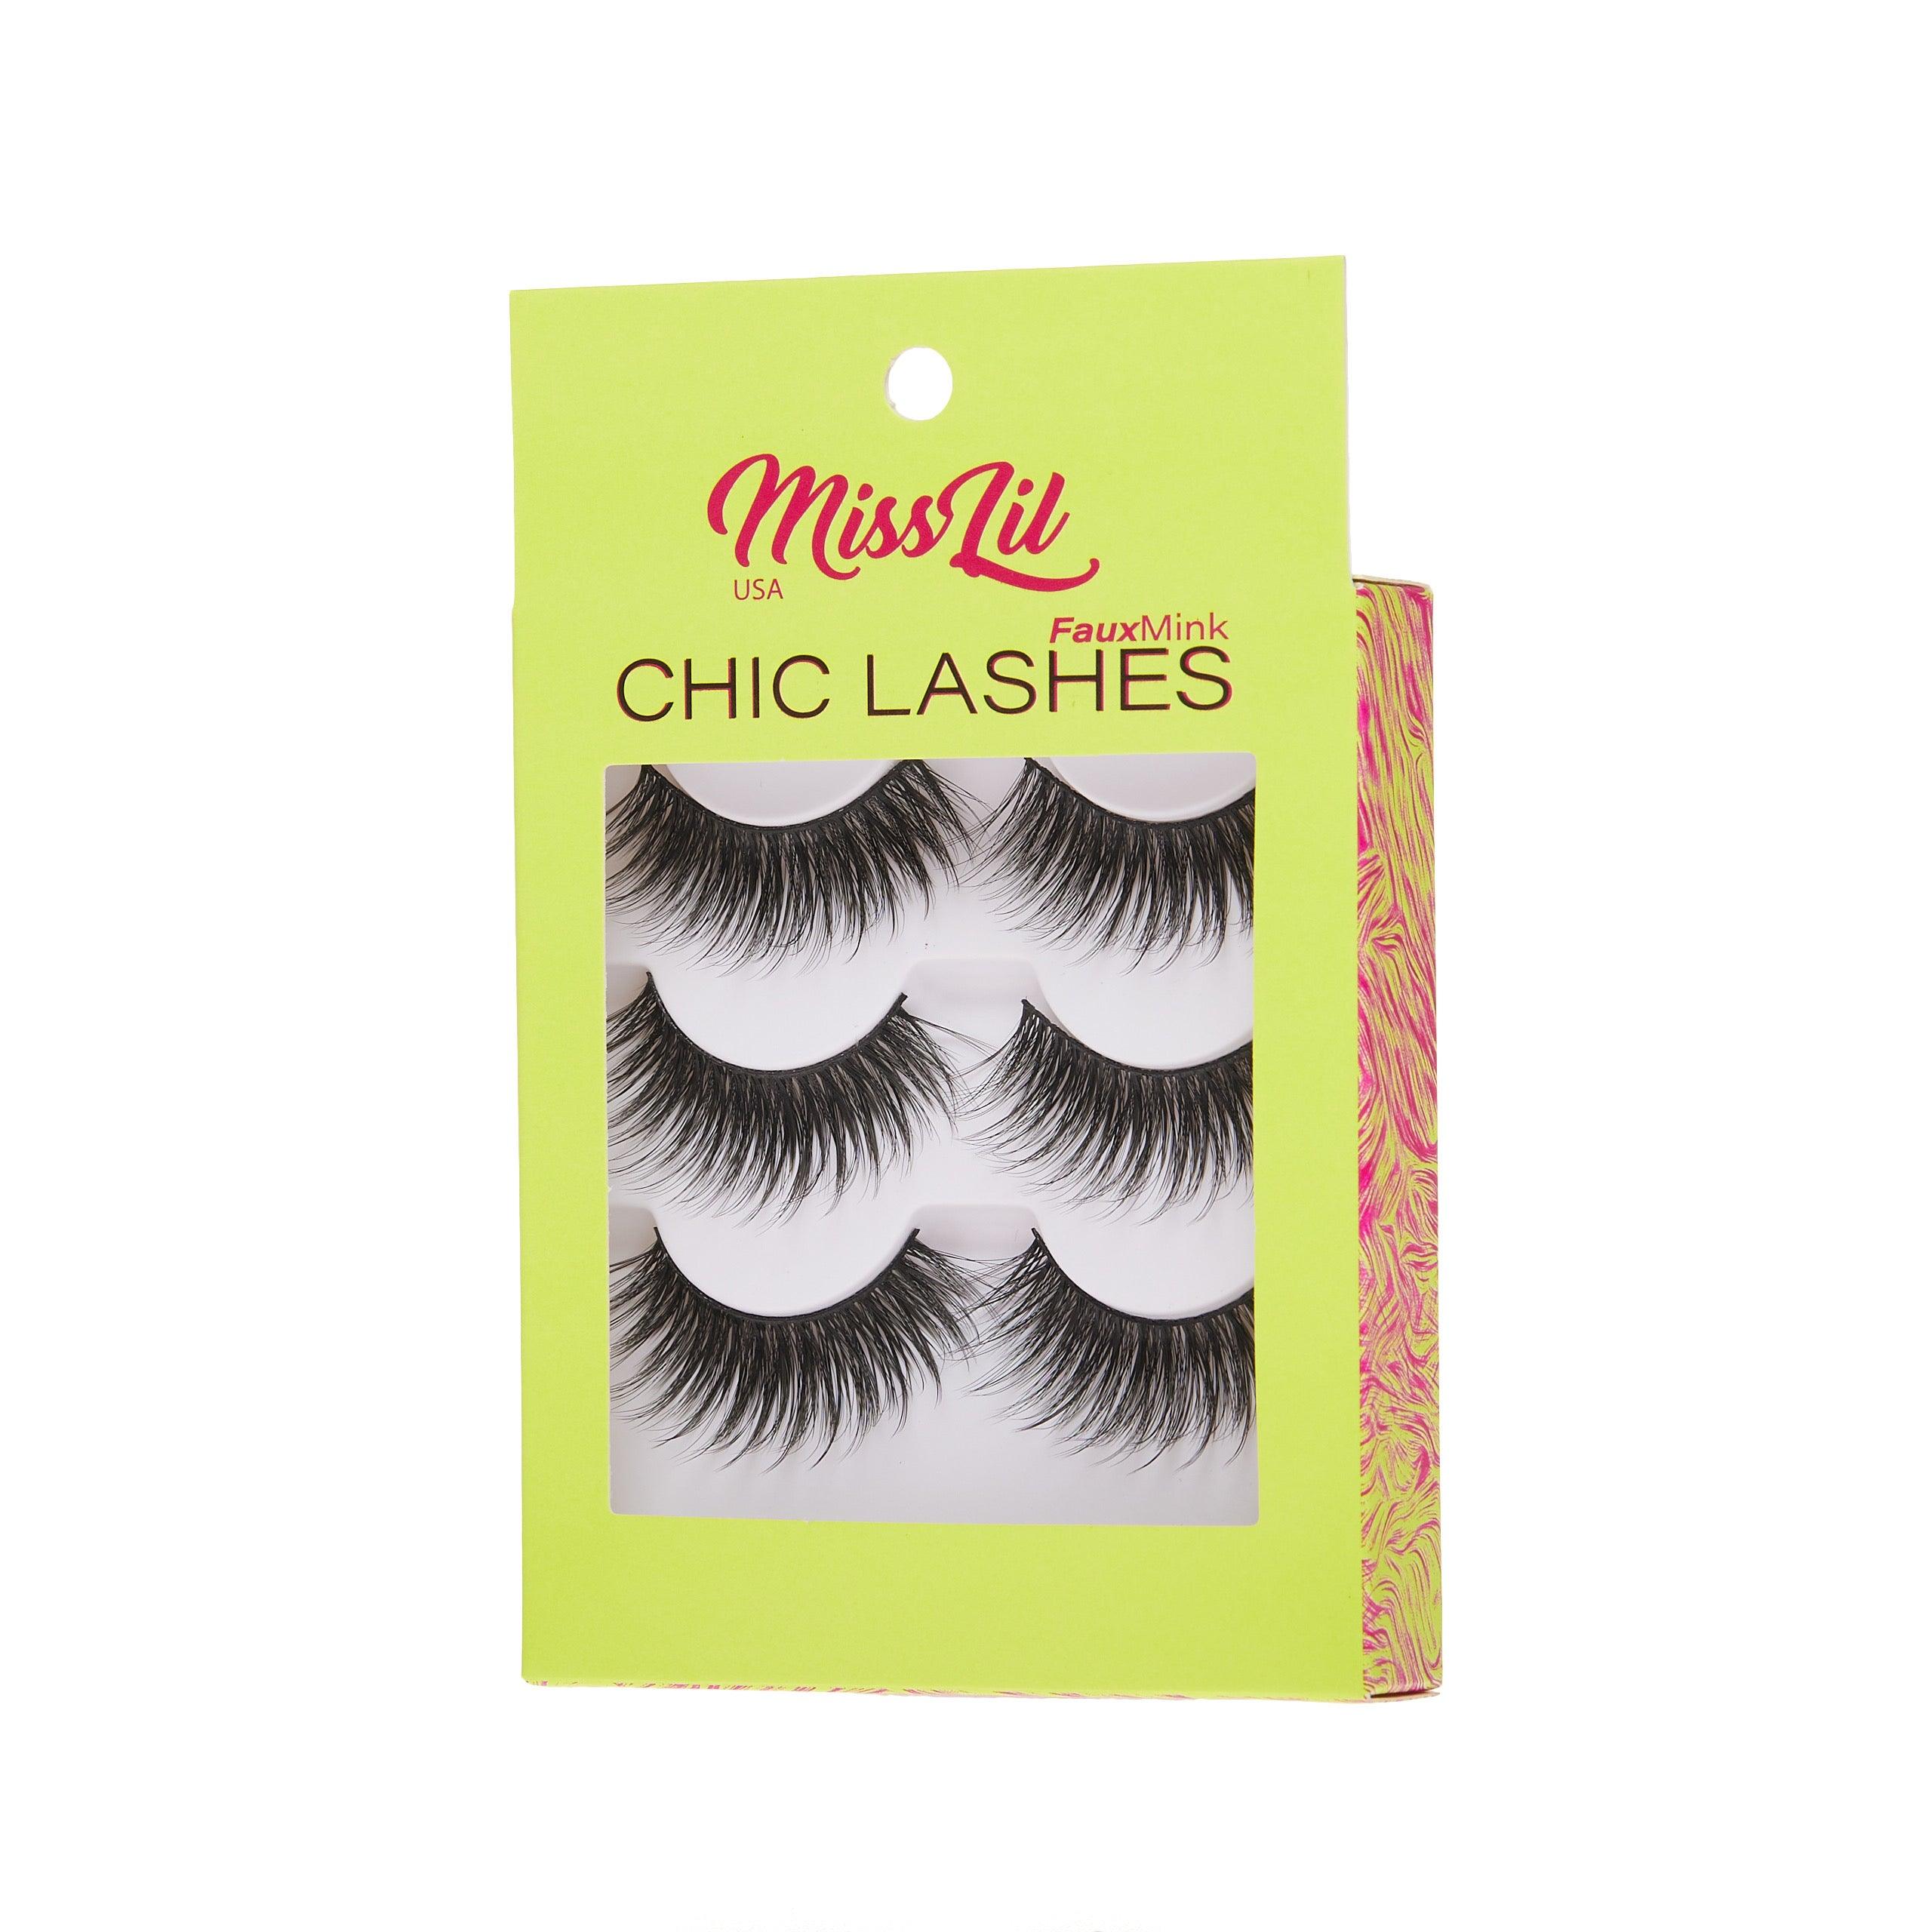 3-Pair Faux Mink Eyelashes - Chic Lashes Collection #30 - Pack of 3 - Miss Lil USA